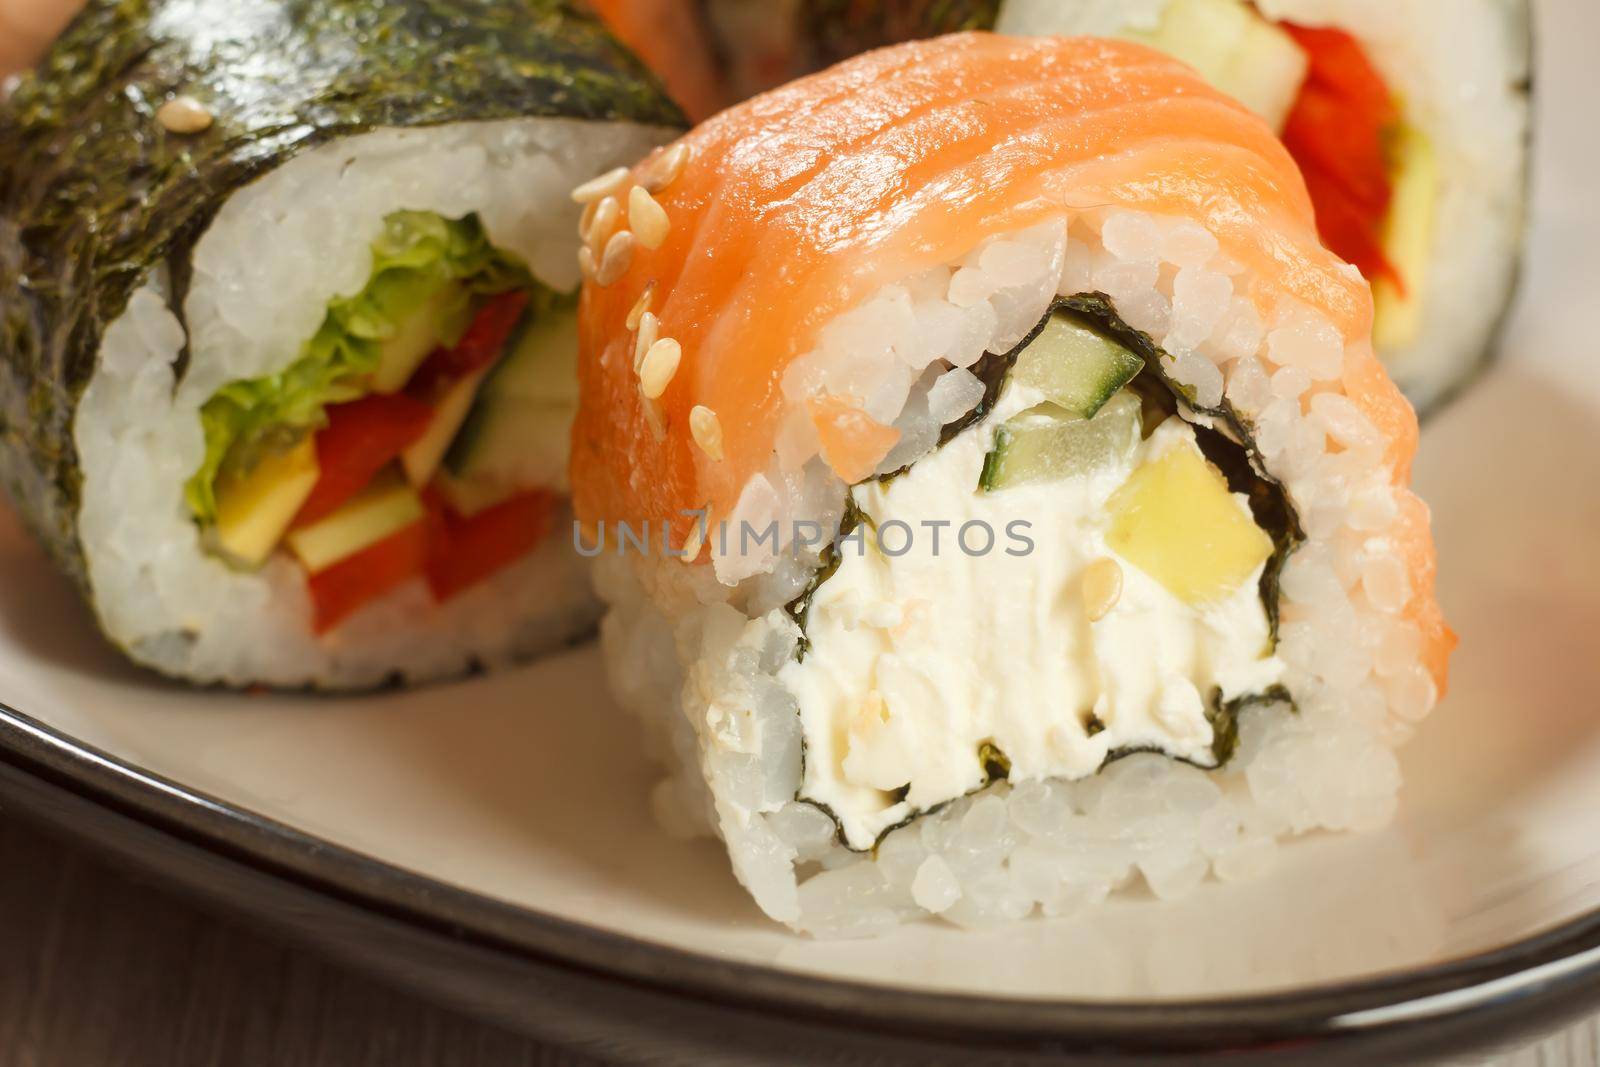 Close up Uramaki Philadelphia. Sushi rolls with salmon, nori, rice, Philadelphia cheese, pieces of avocado, cucumber and sushi rolls with vegetables on the background. Japanese cuisine. Shallow depth of field